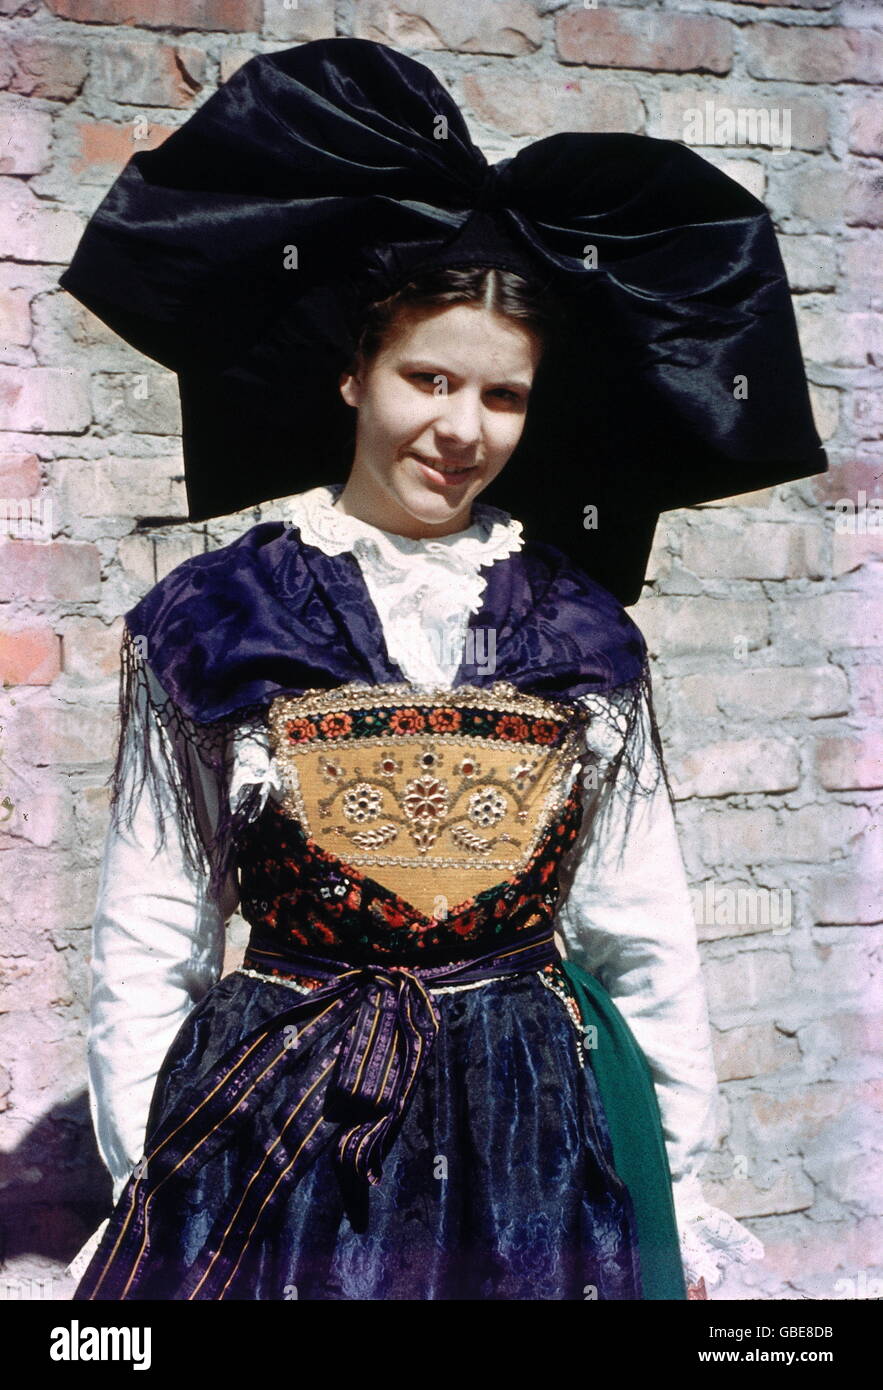 traditional dress of french